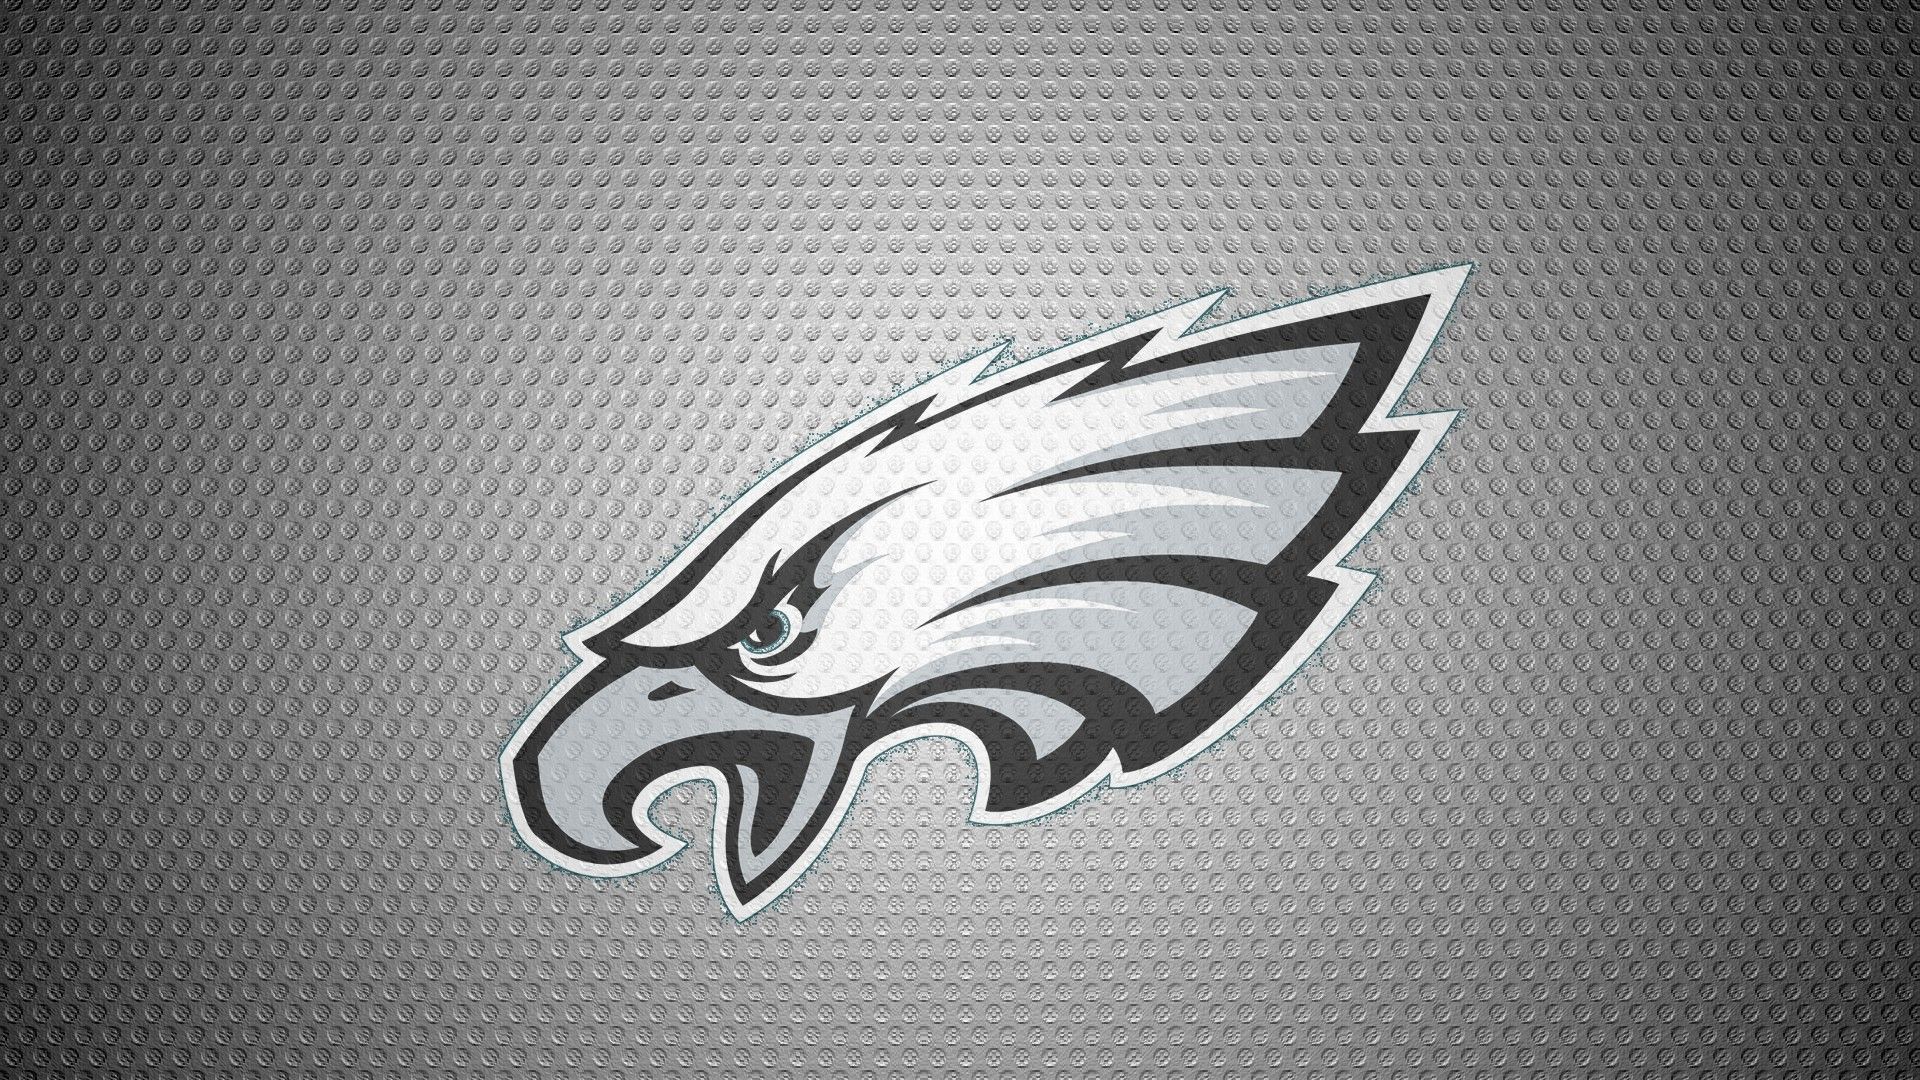 Check the best collection of Eagles Logo Wallpaper for desktop, laptop, tablet and mobile device. You can download them free